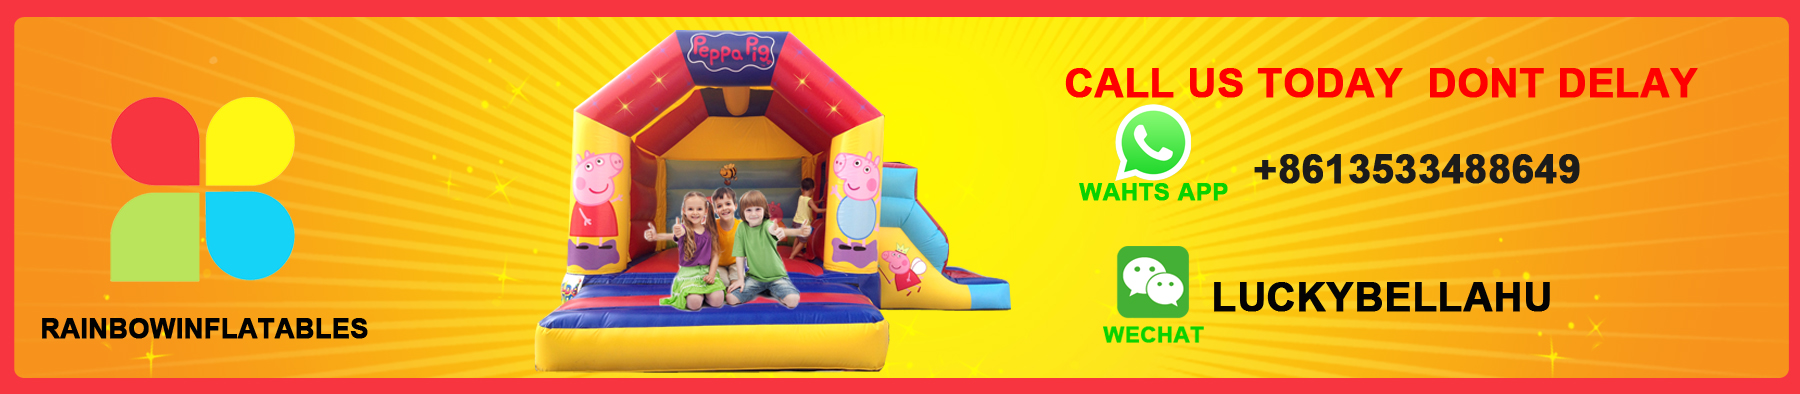 RAINBOW INFLATABLES Contact information